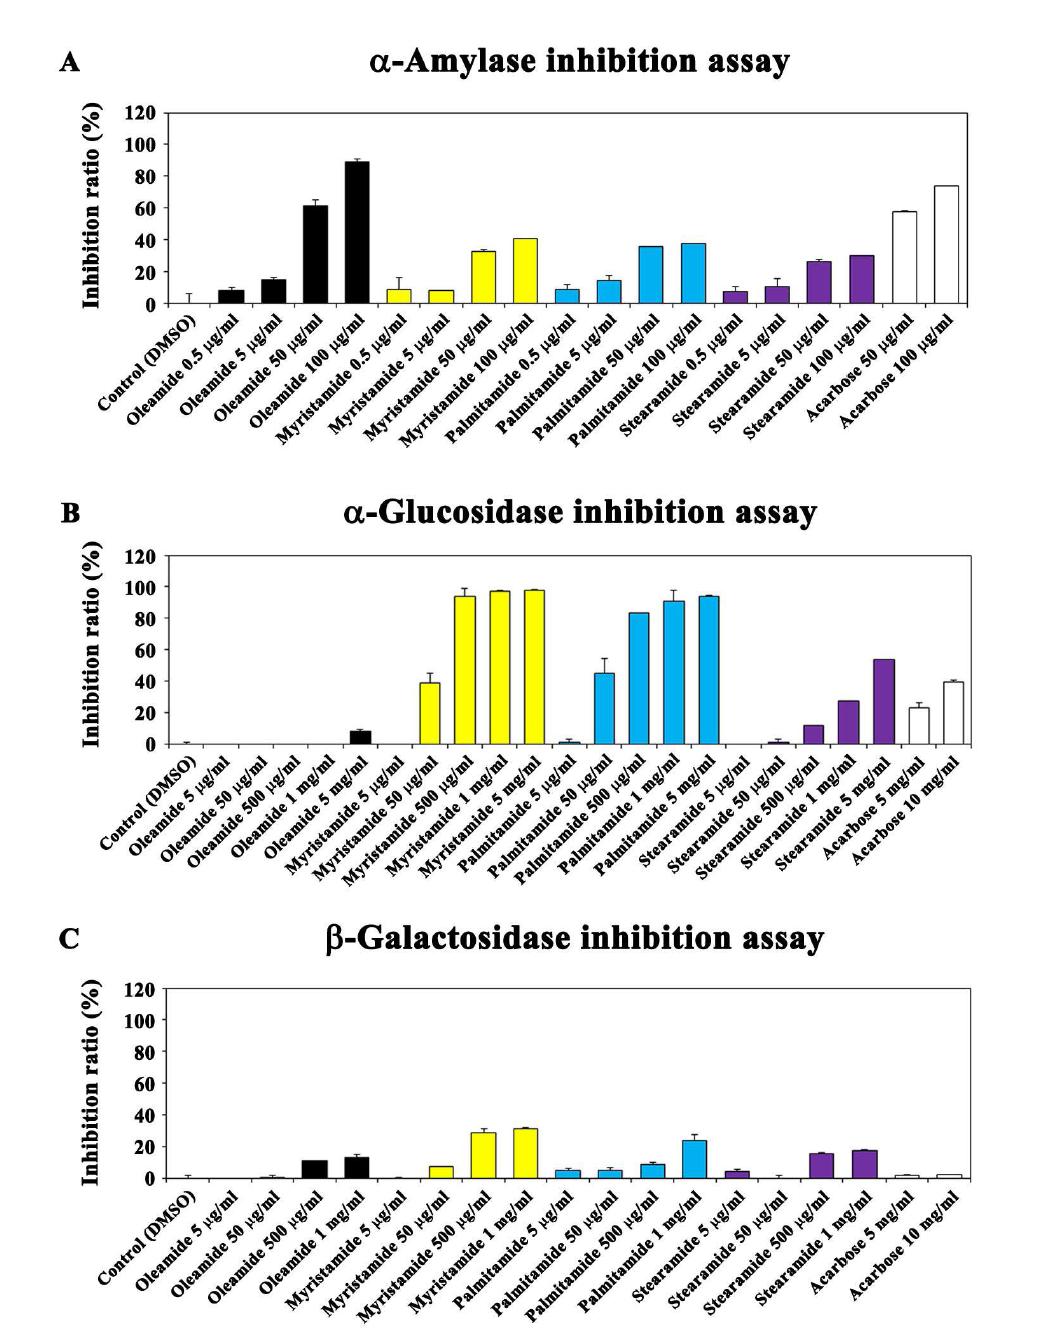 Inhibitory effect of fatty acid amides on the activities of α-amylase (A), α-glucosidase (B), and β-galactosidase (C).